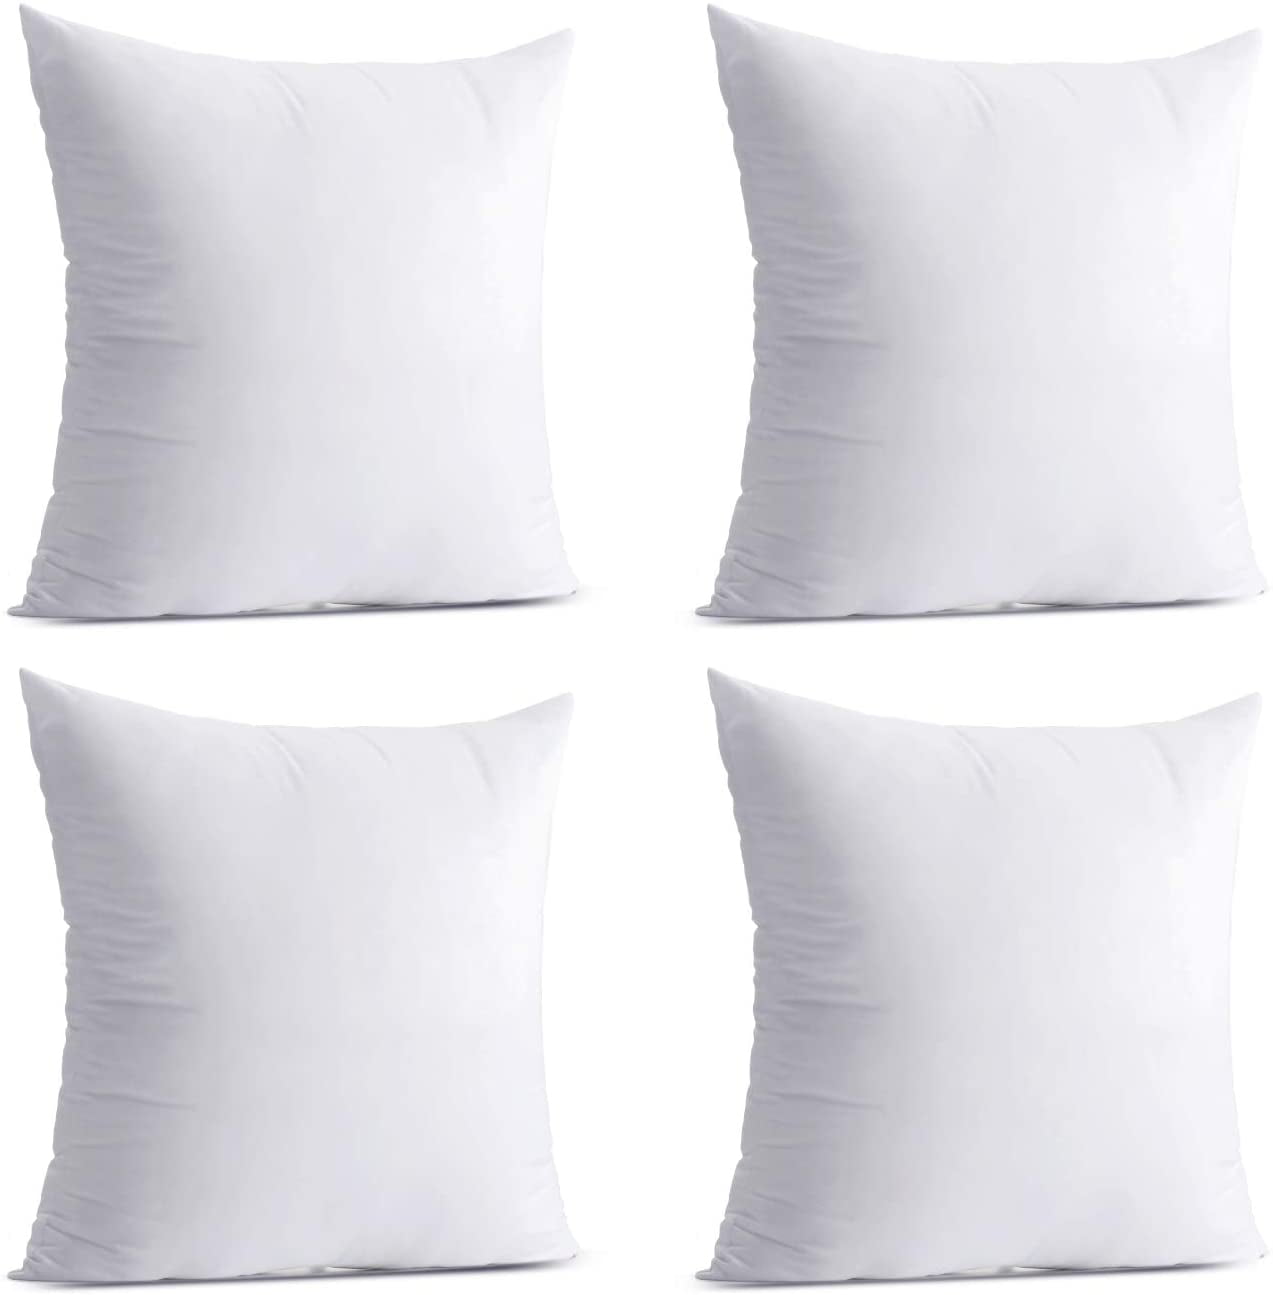 Square Indoor Decorative Pillows Harapu 4 Pack Throw Pillows Insert Bed and Couch Pillows,18 x 18 Inches（White） Stuffer Pillow Inserts